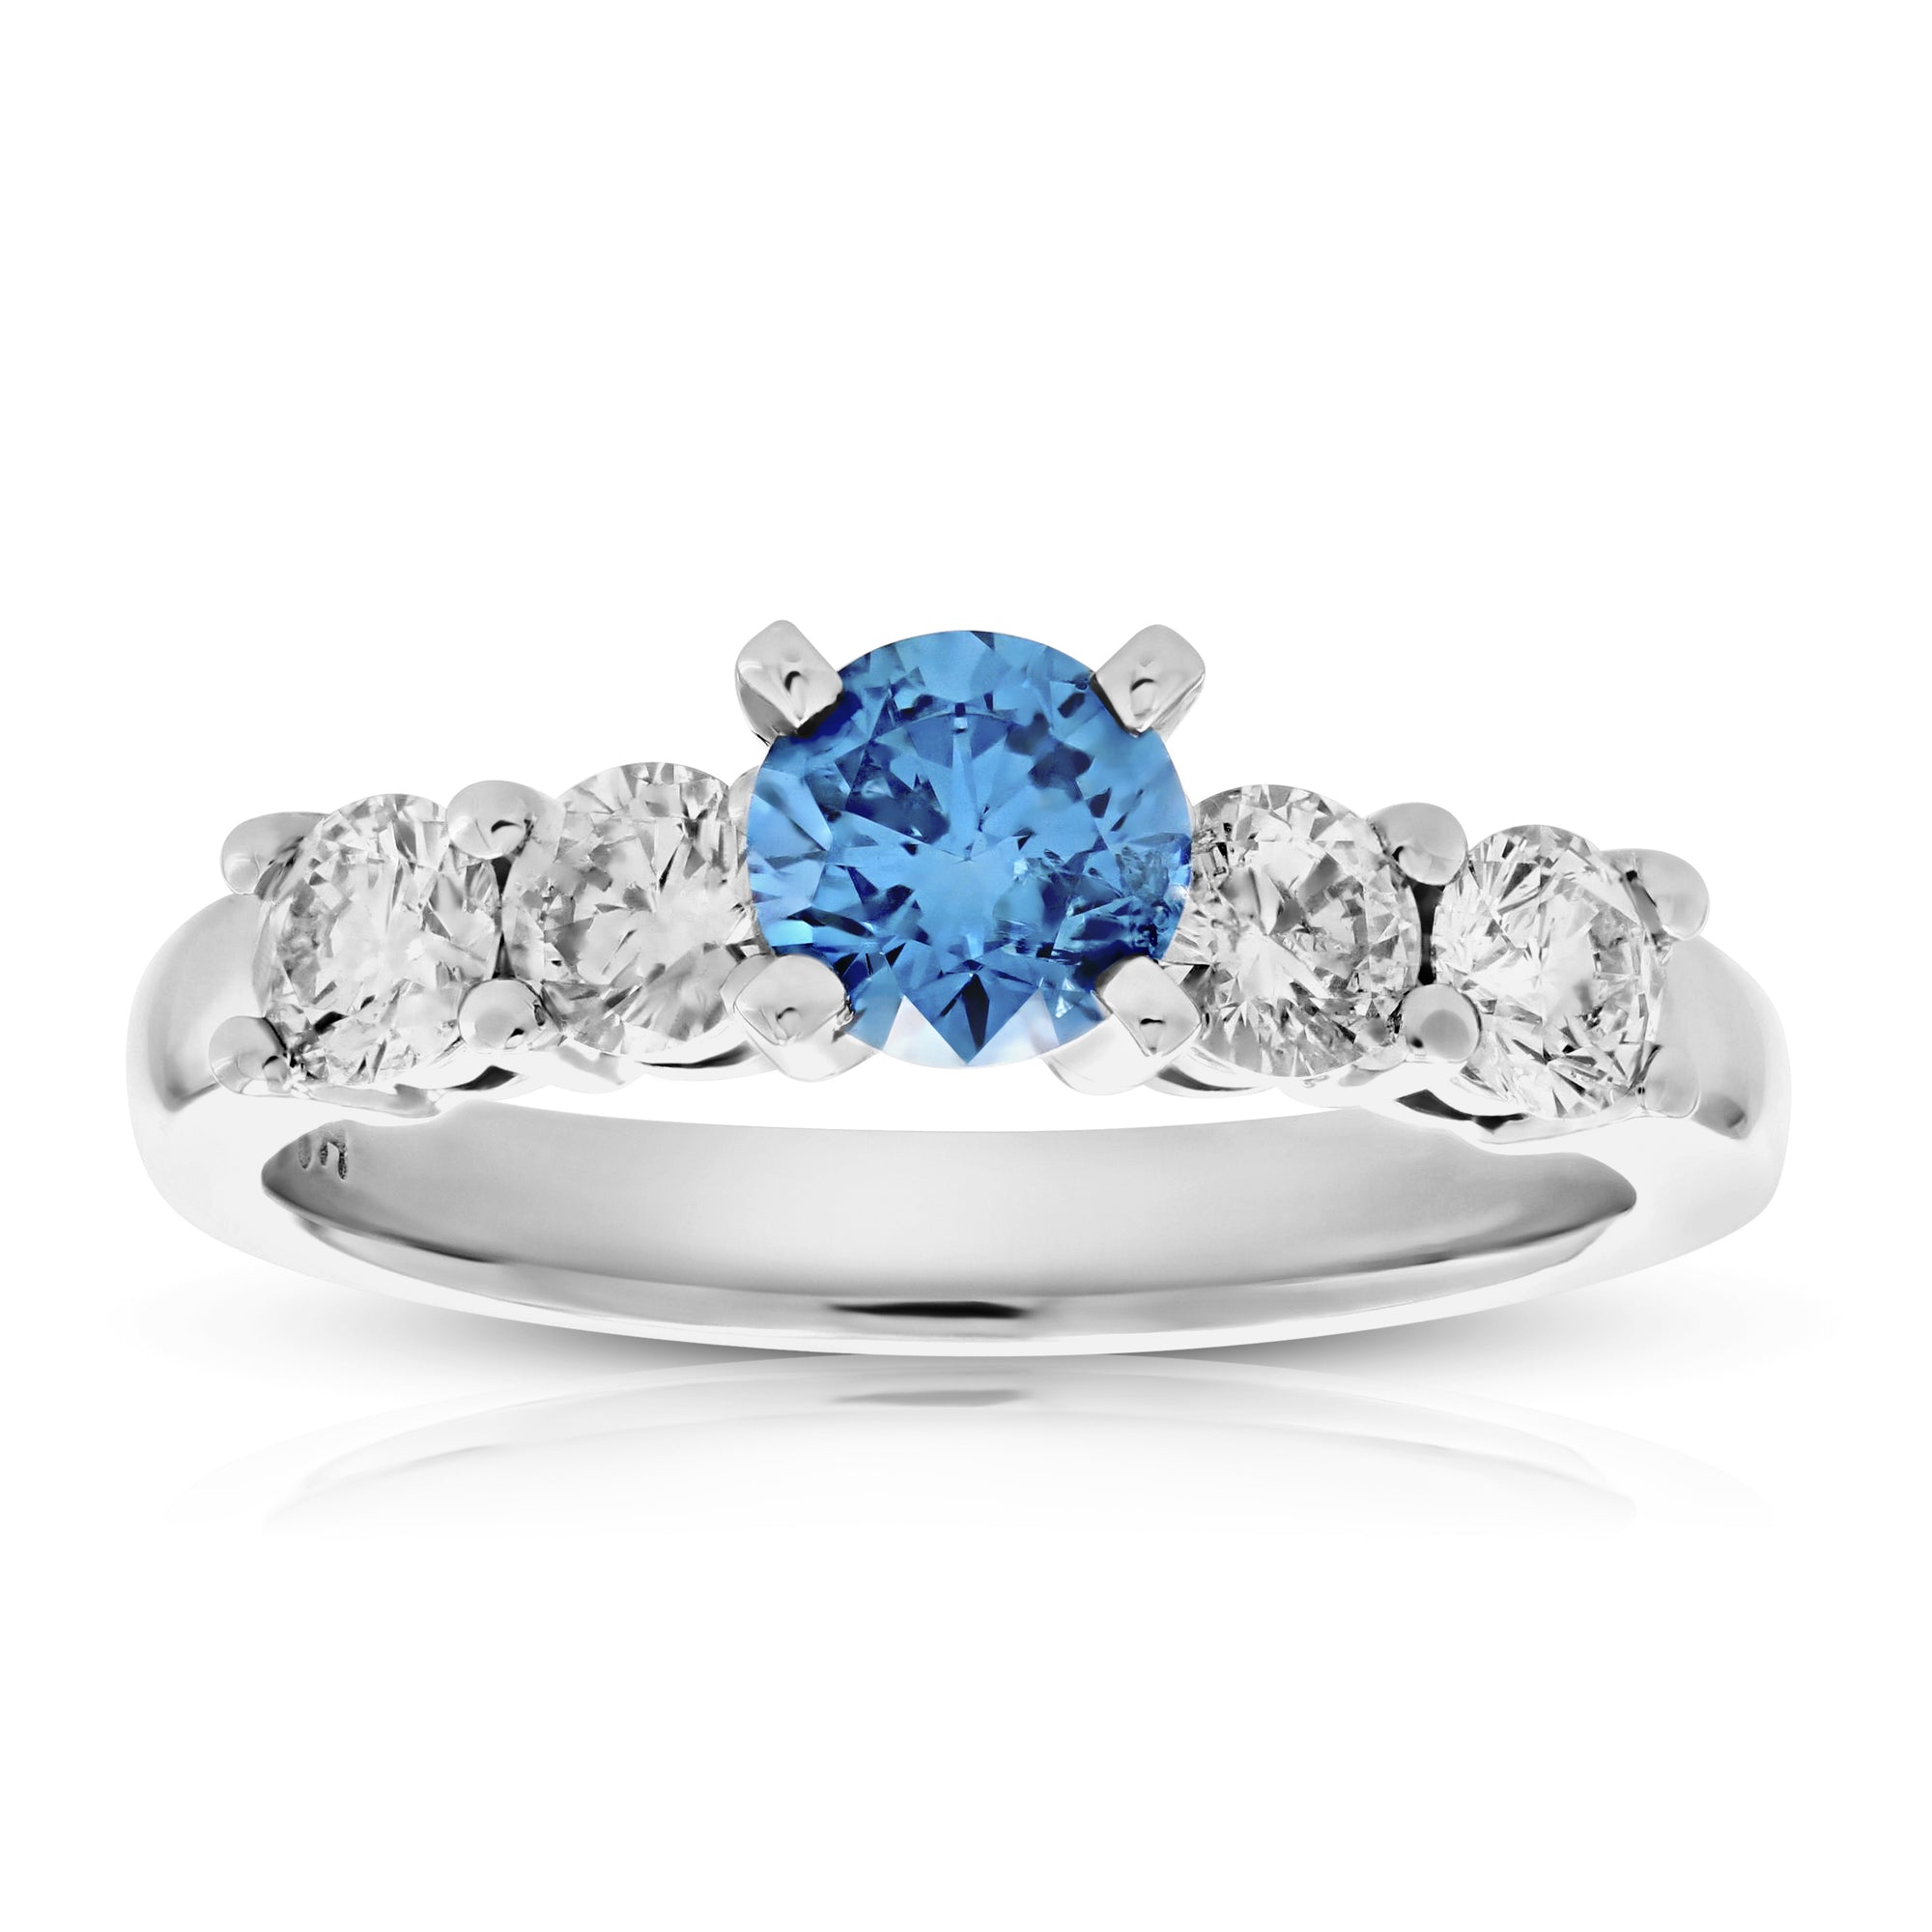 1.40 cttw Blue and White Diamond Engagement Ring 14K White Gold Bridal Size 7